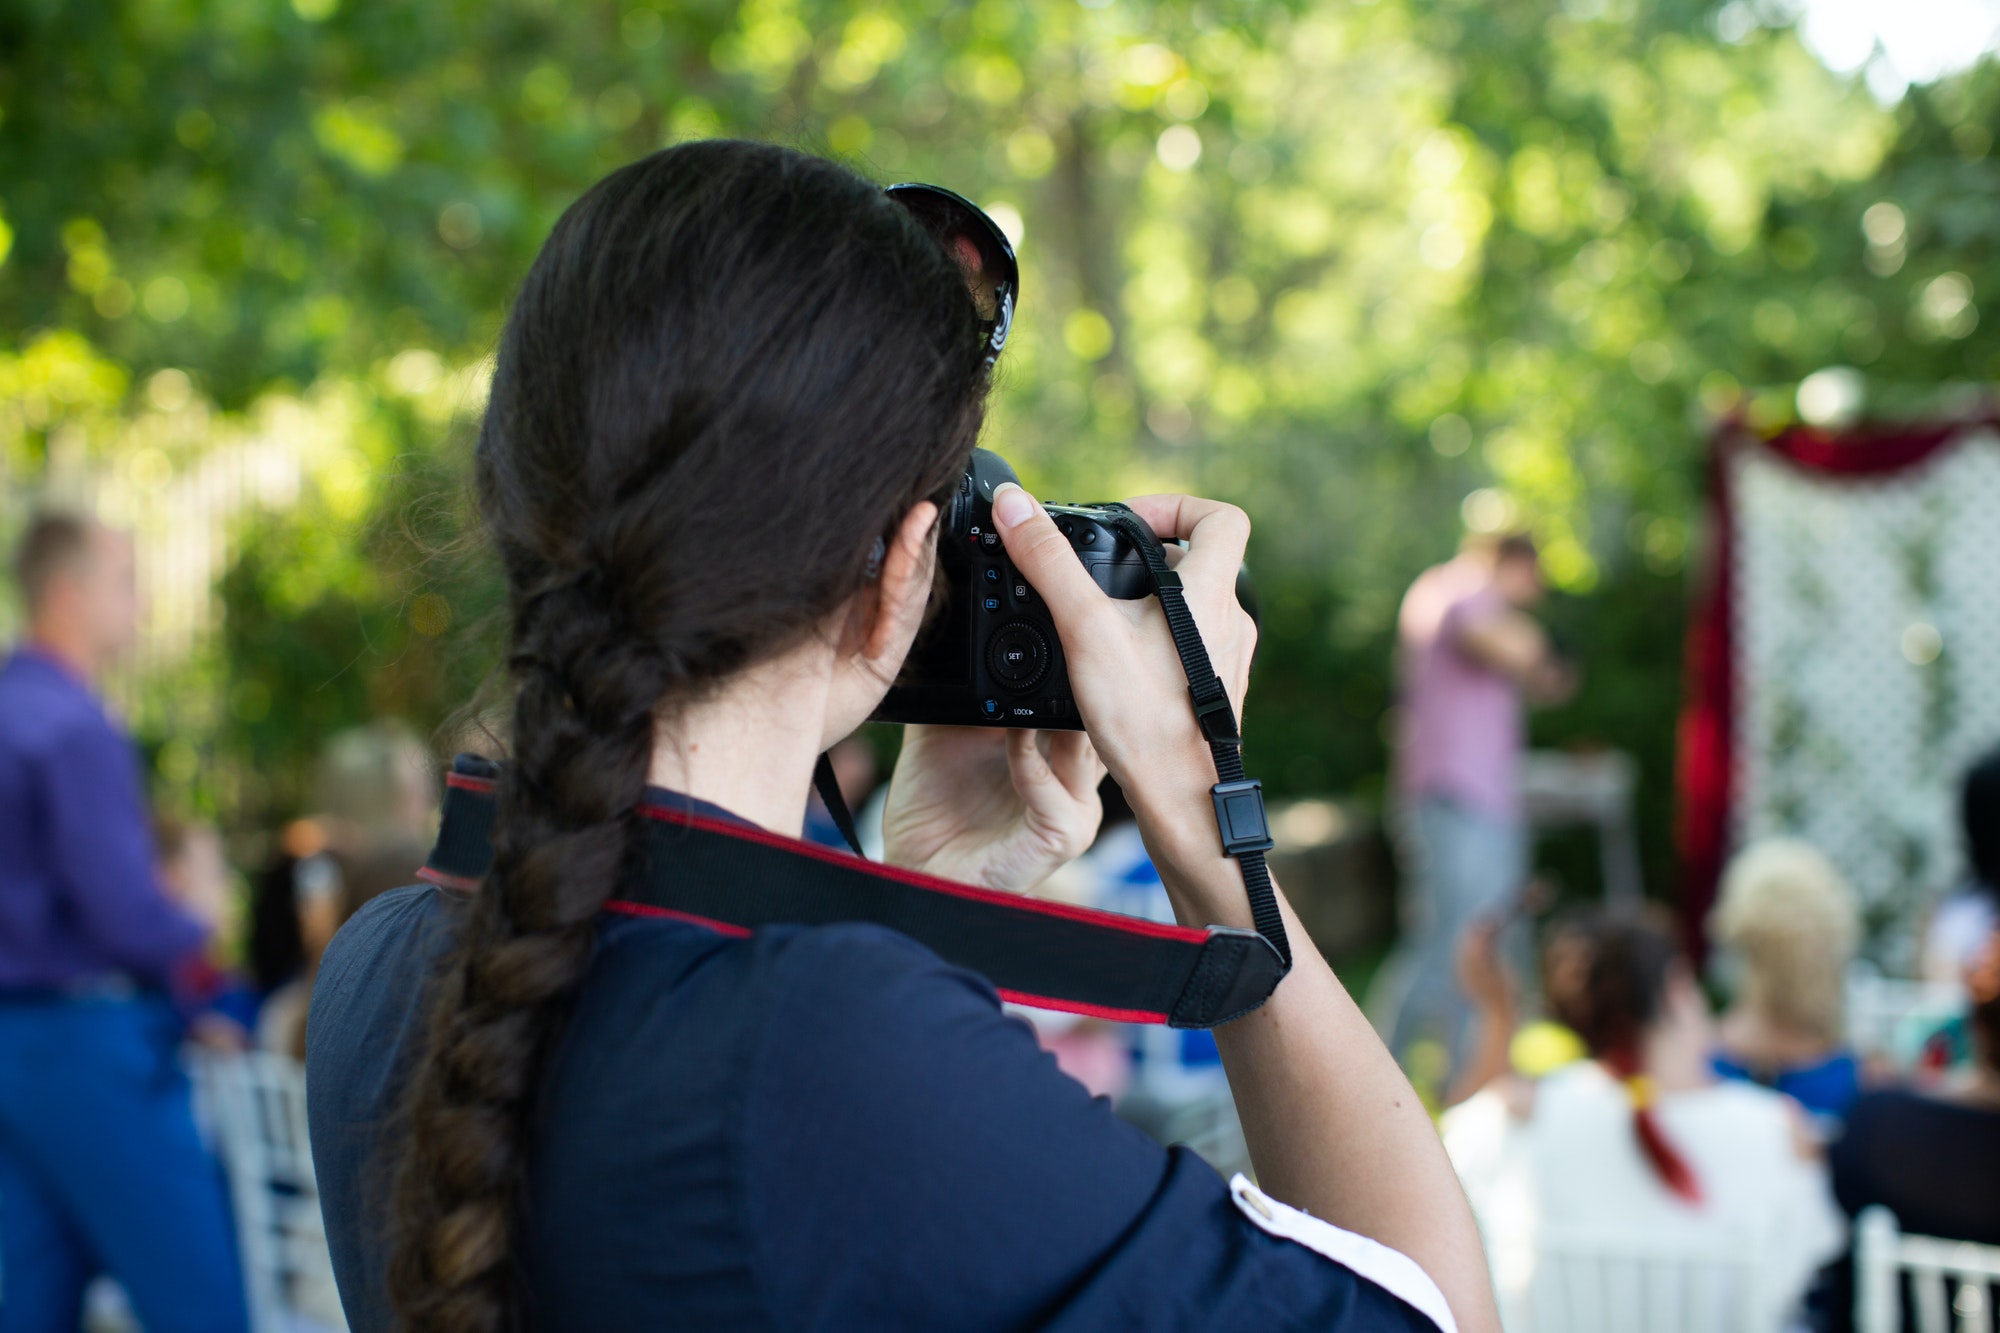 Photographer is a woman photographing a wedding ceremony